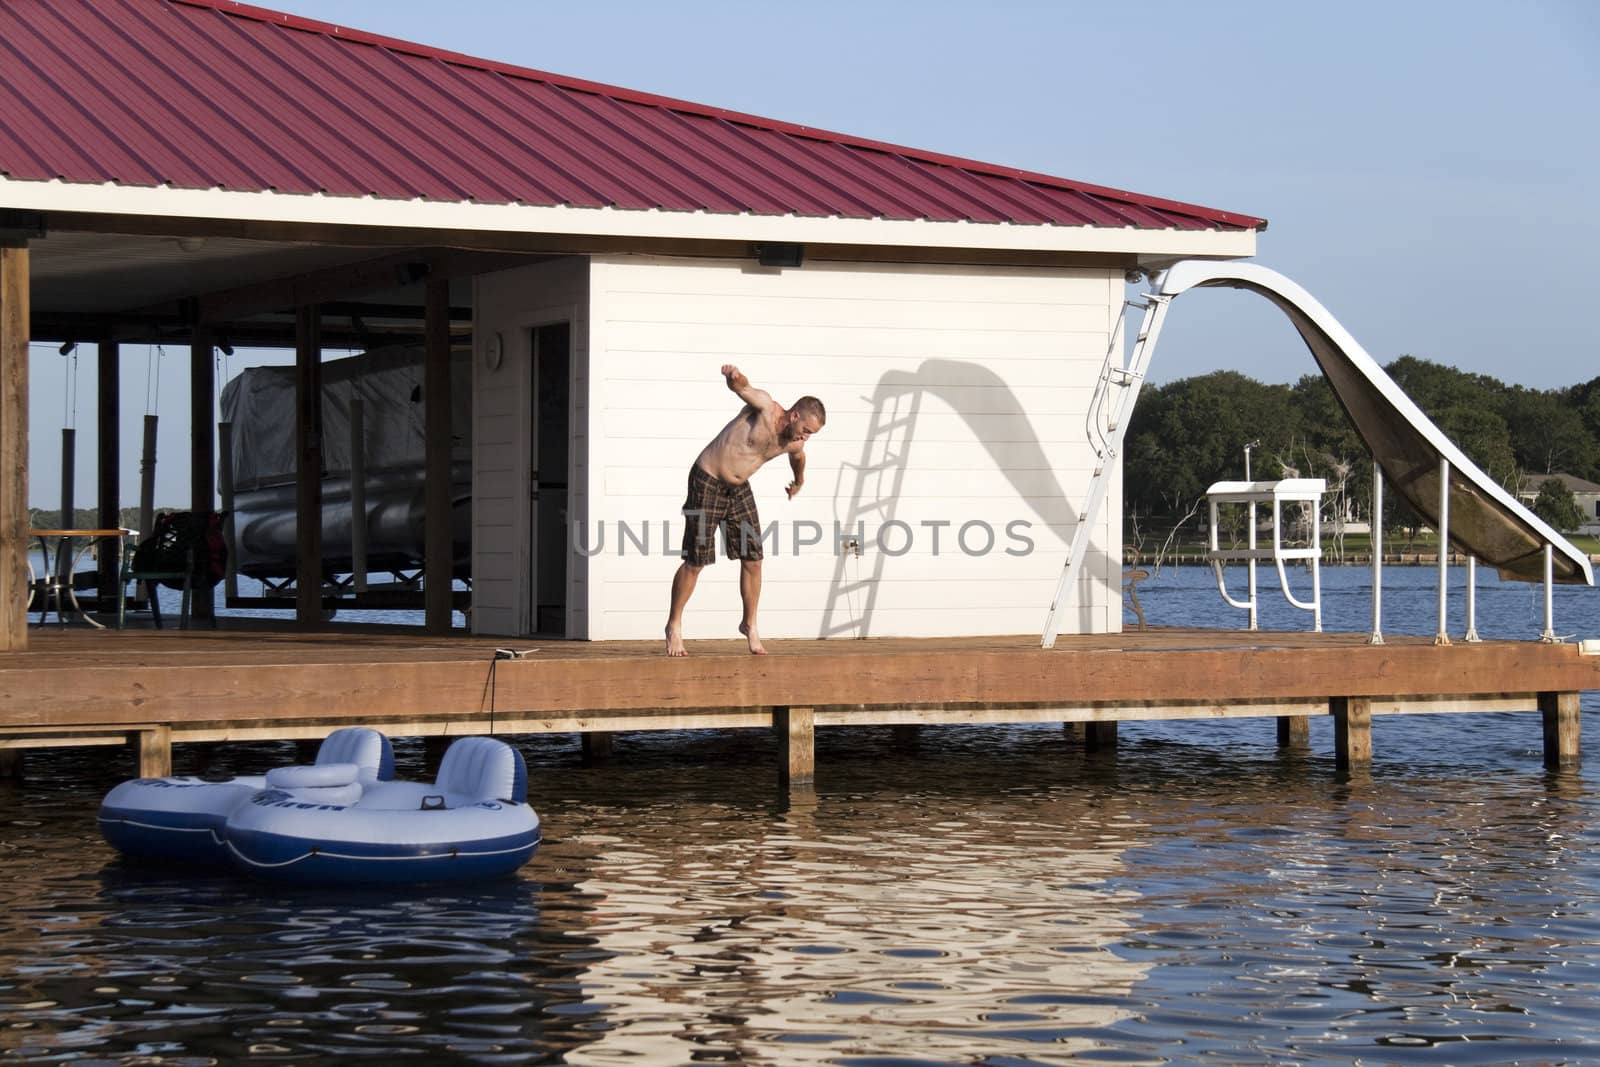 A man is doing a back flip off the end of a dock into the water